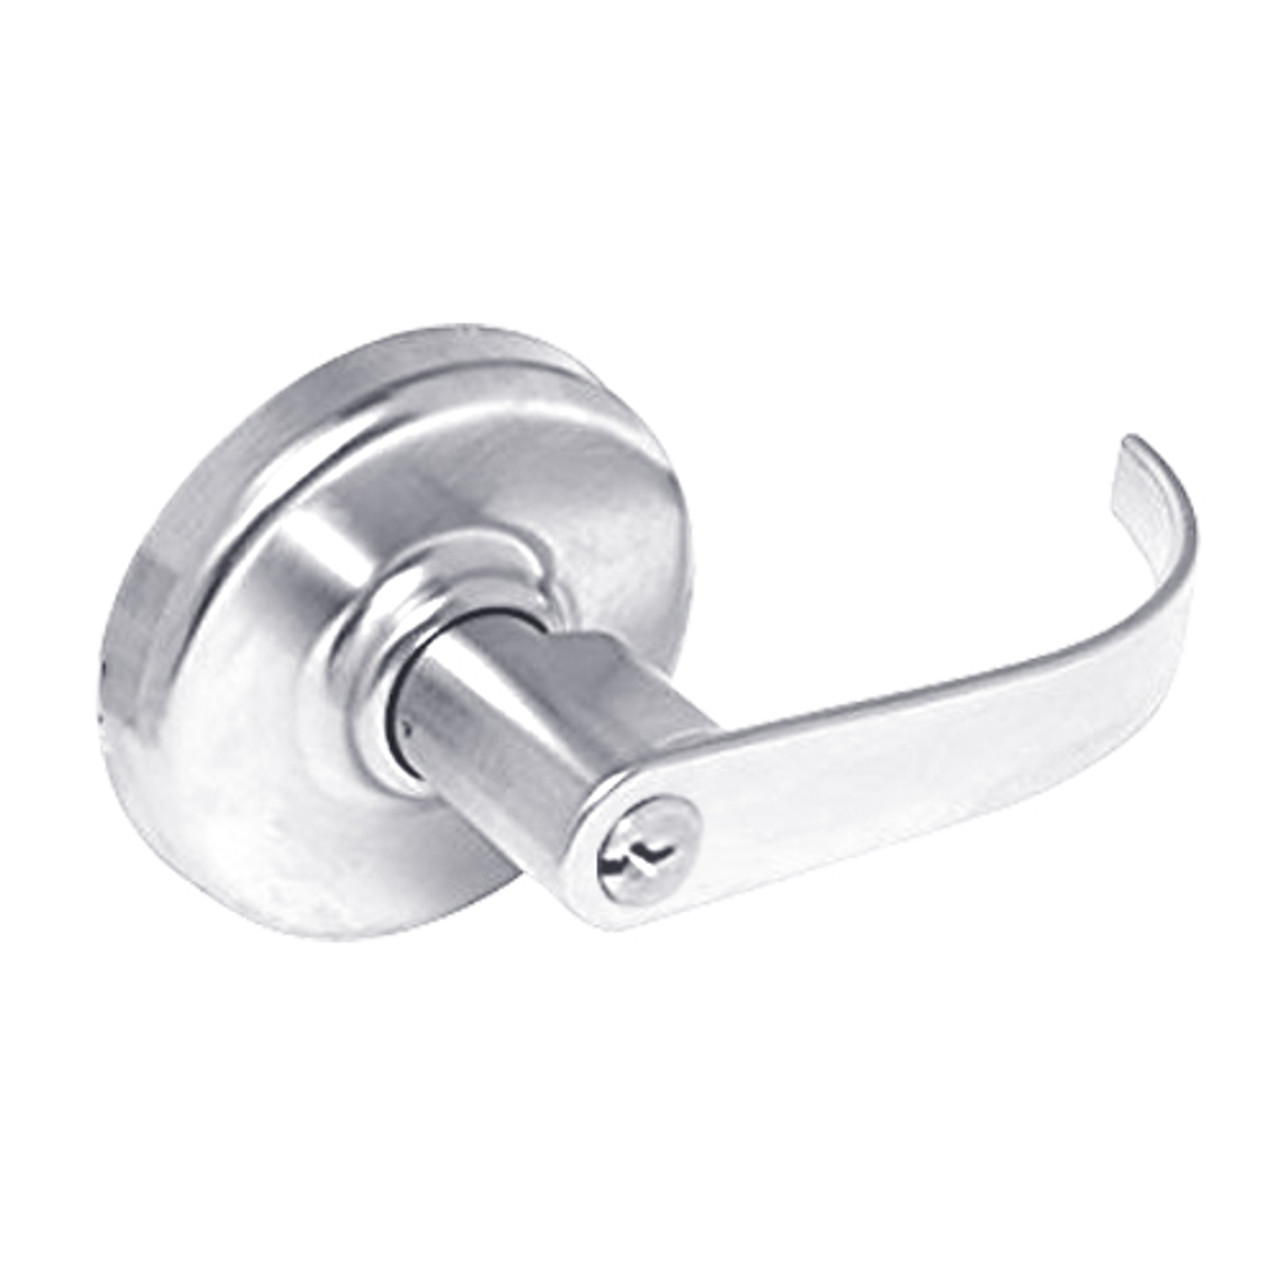 CL3161-PZD-625 Corbin CL3100 Series Vandal Resistant Entrance Cylindrical Locksets with Princeton Lever in Bright Chrome Finish